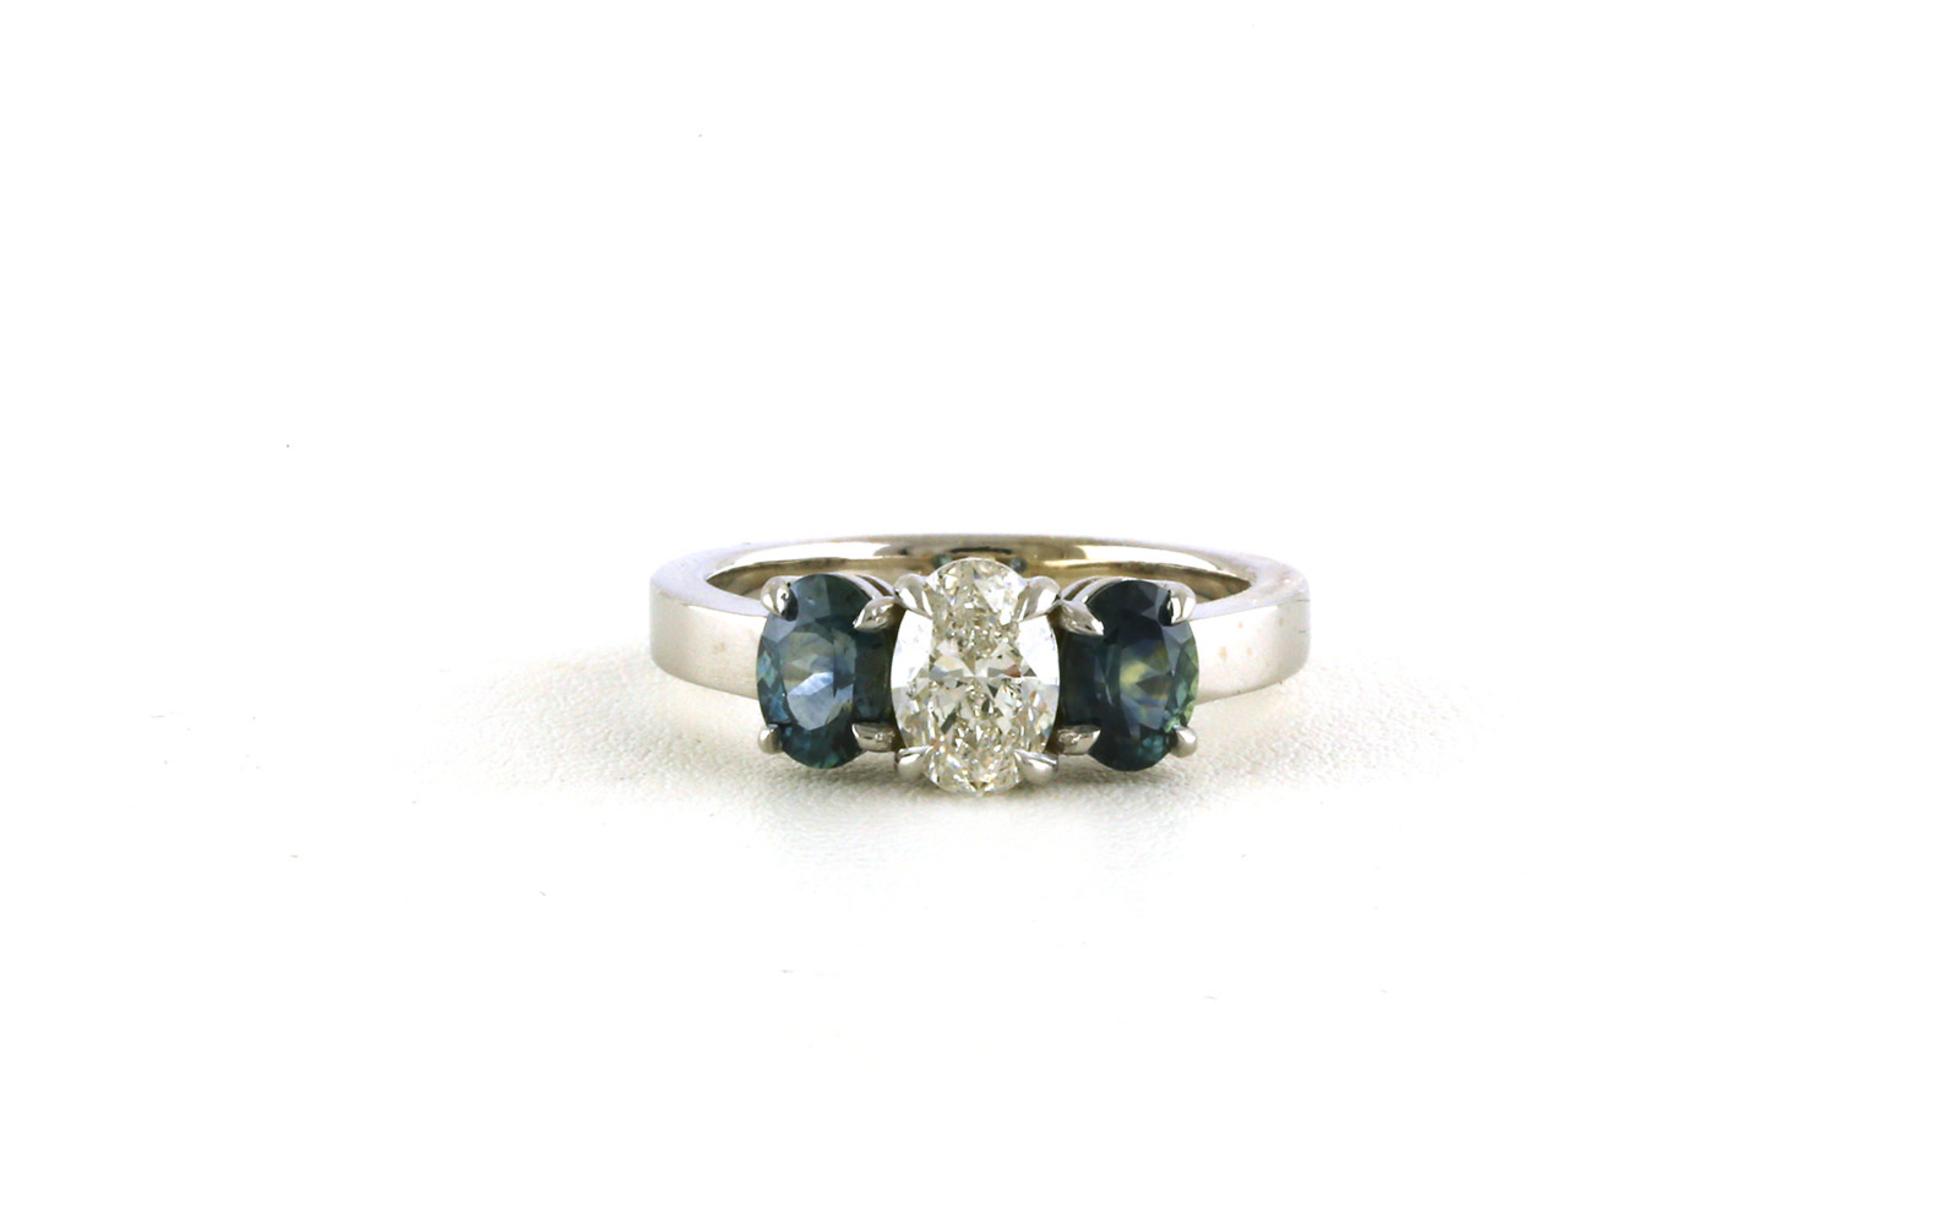 3-Stone Oval-cut Diamond and Montana Sapphire Ring in White Gold (2.22cts TWT)